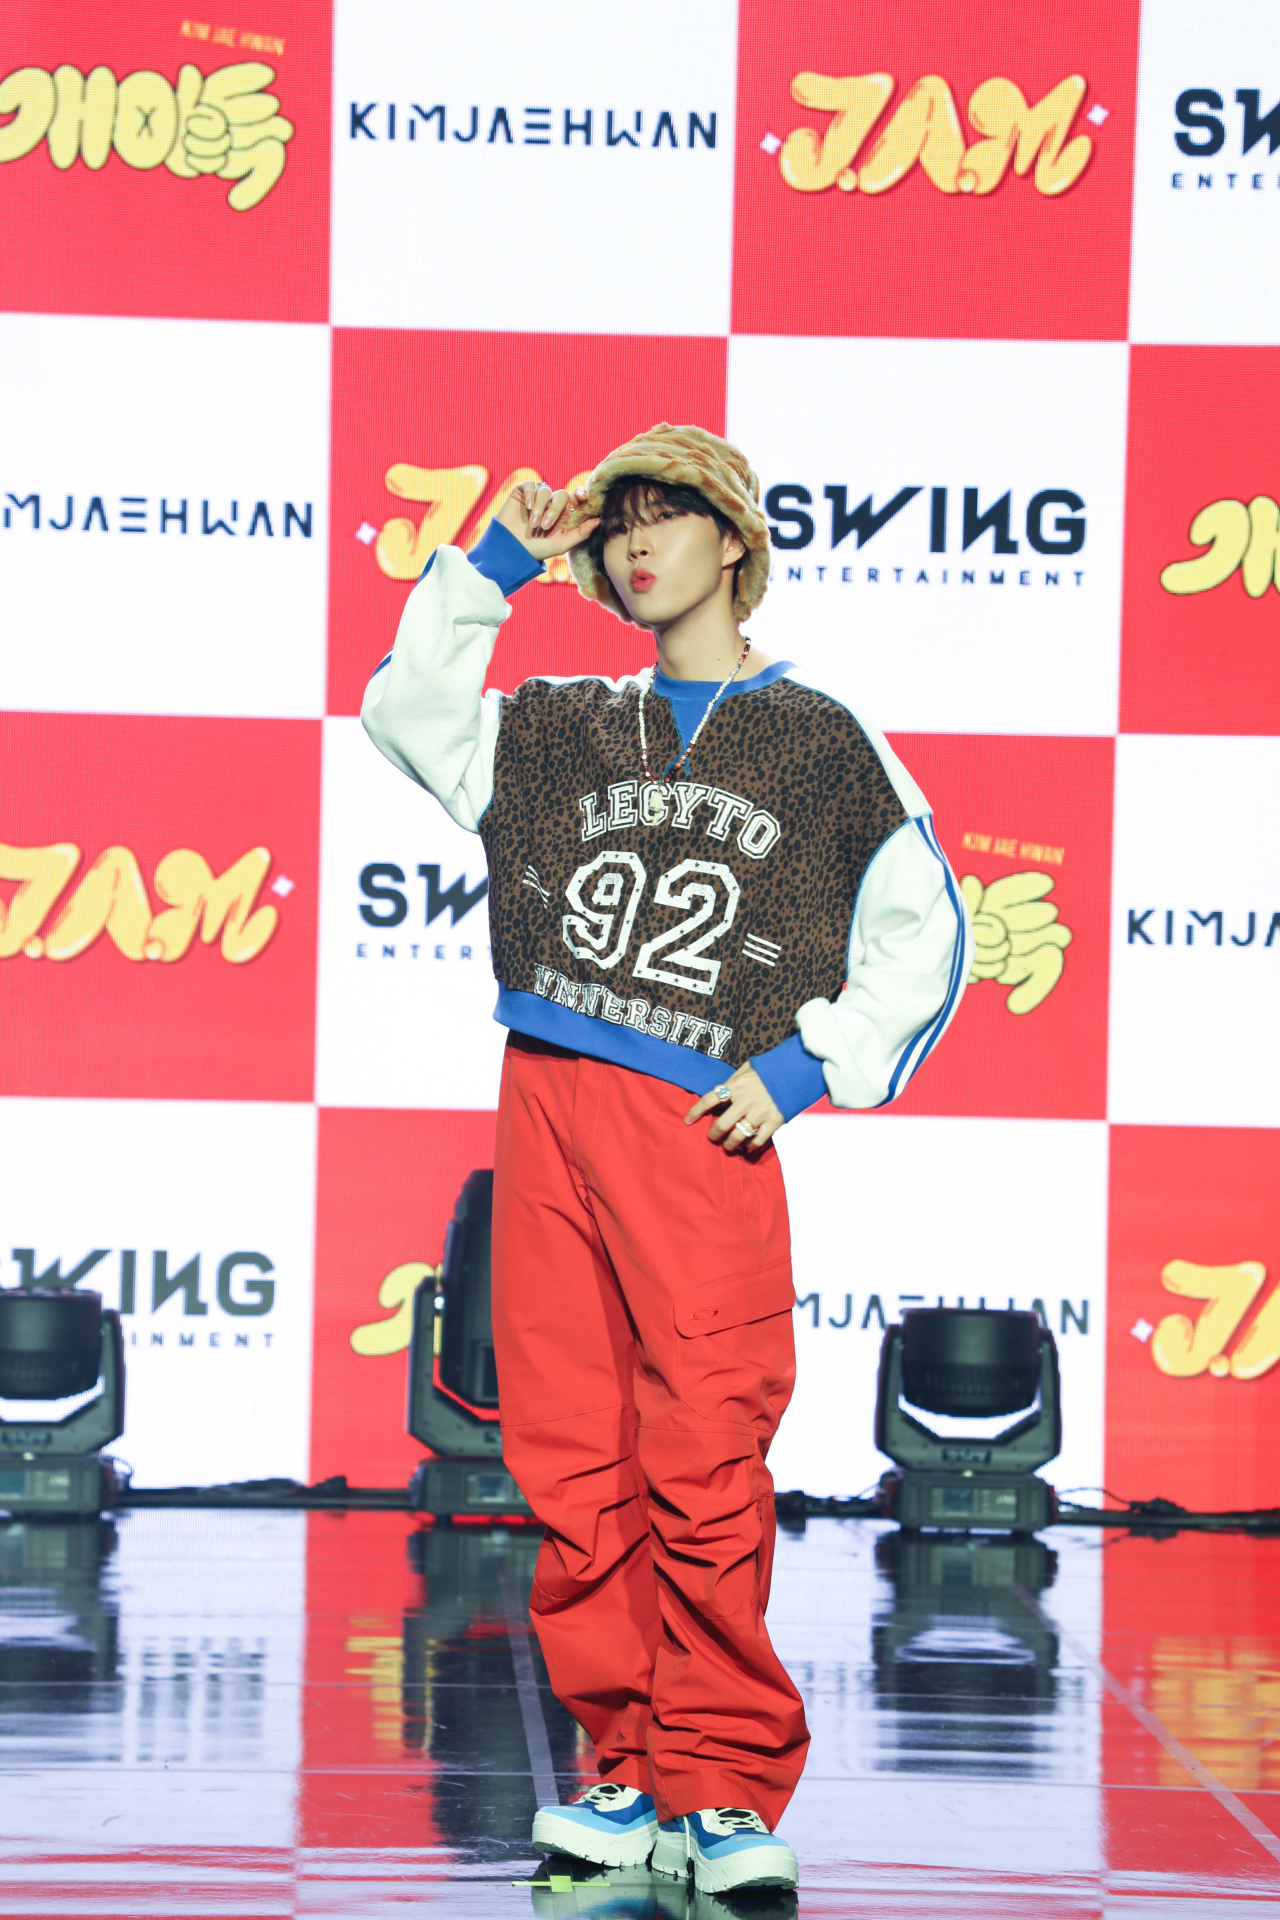 Singer Kim Jae-hwan poses during the media showcase event for his sixth EP, 